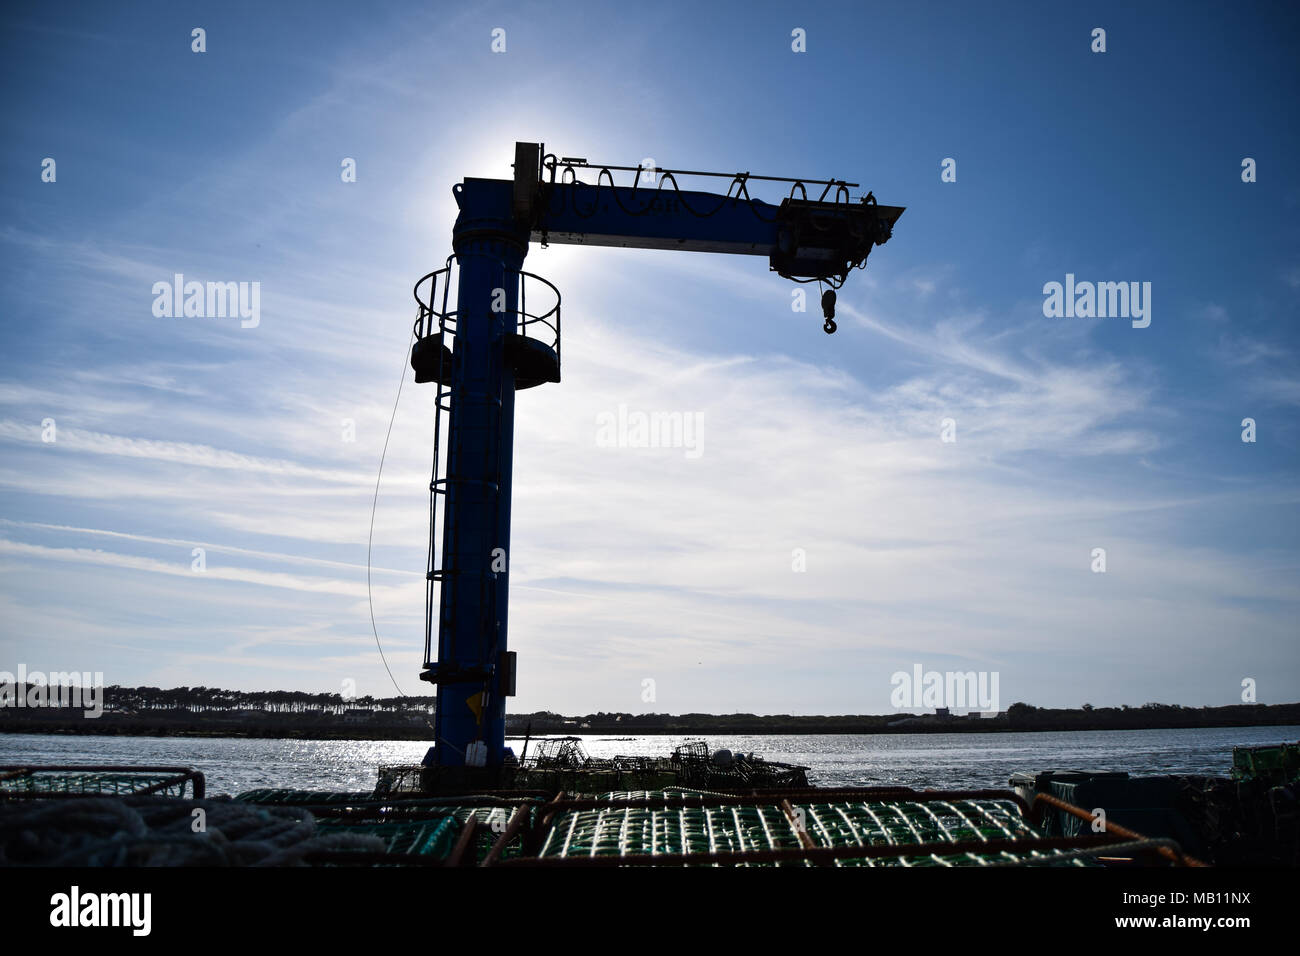 Industrial fishing activities in Portugal Stock Photo